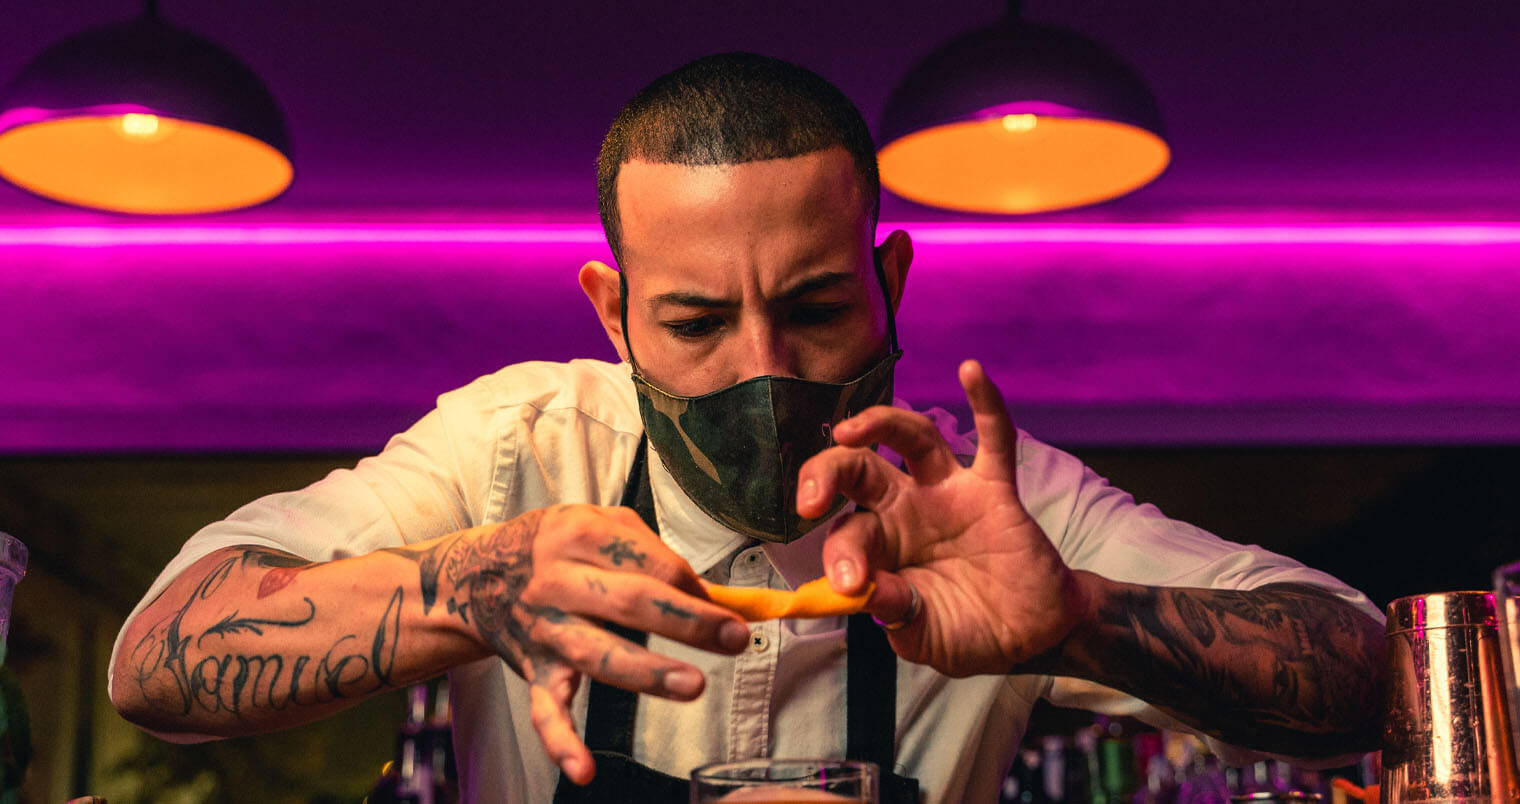 Bartender at work, featured image